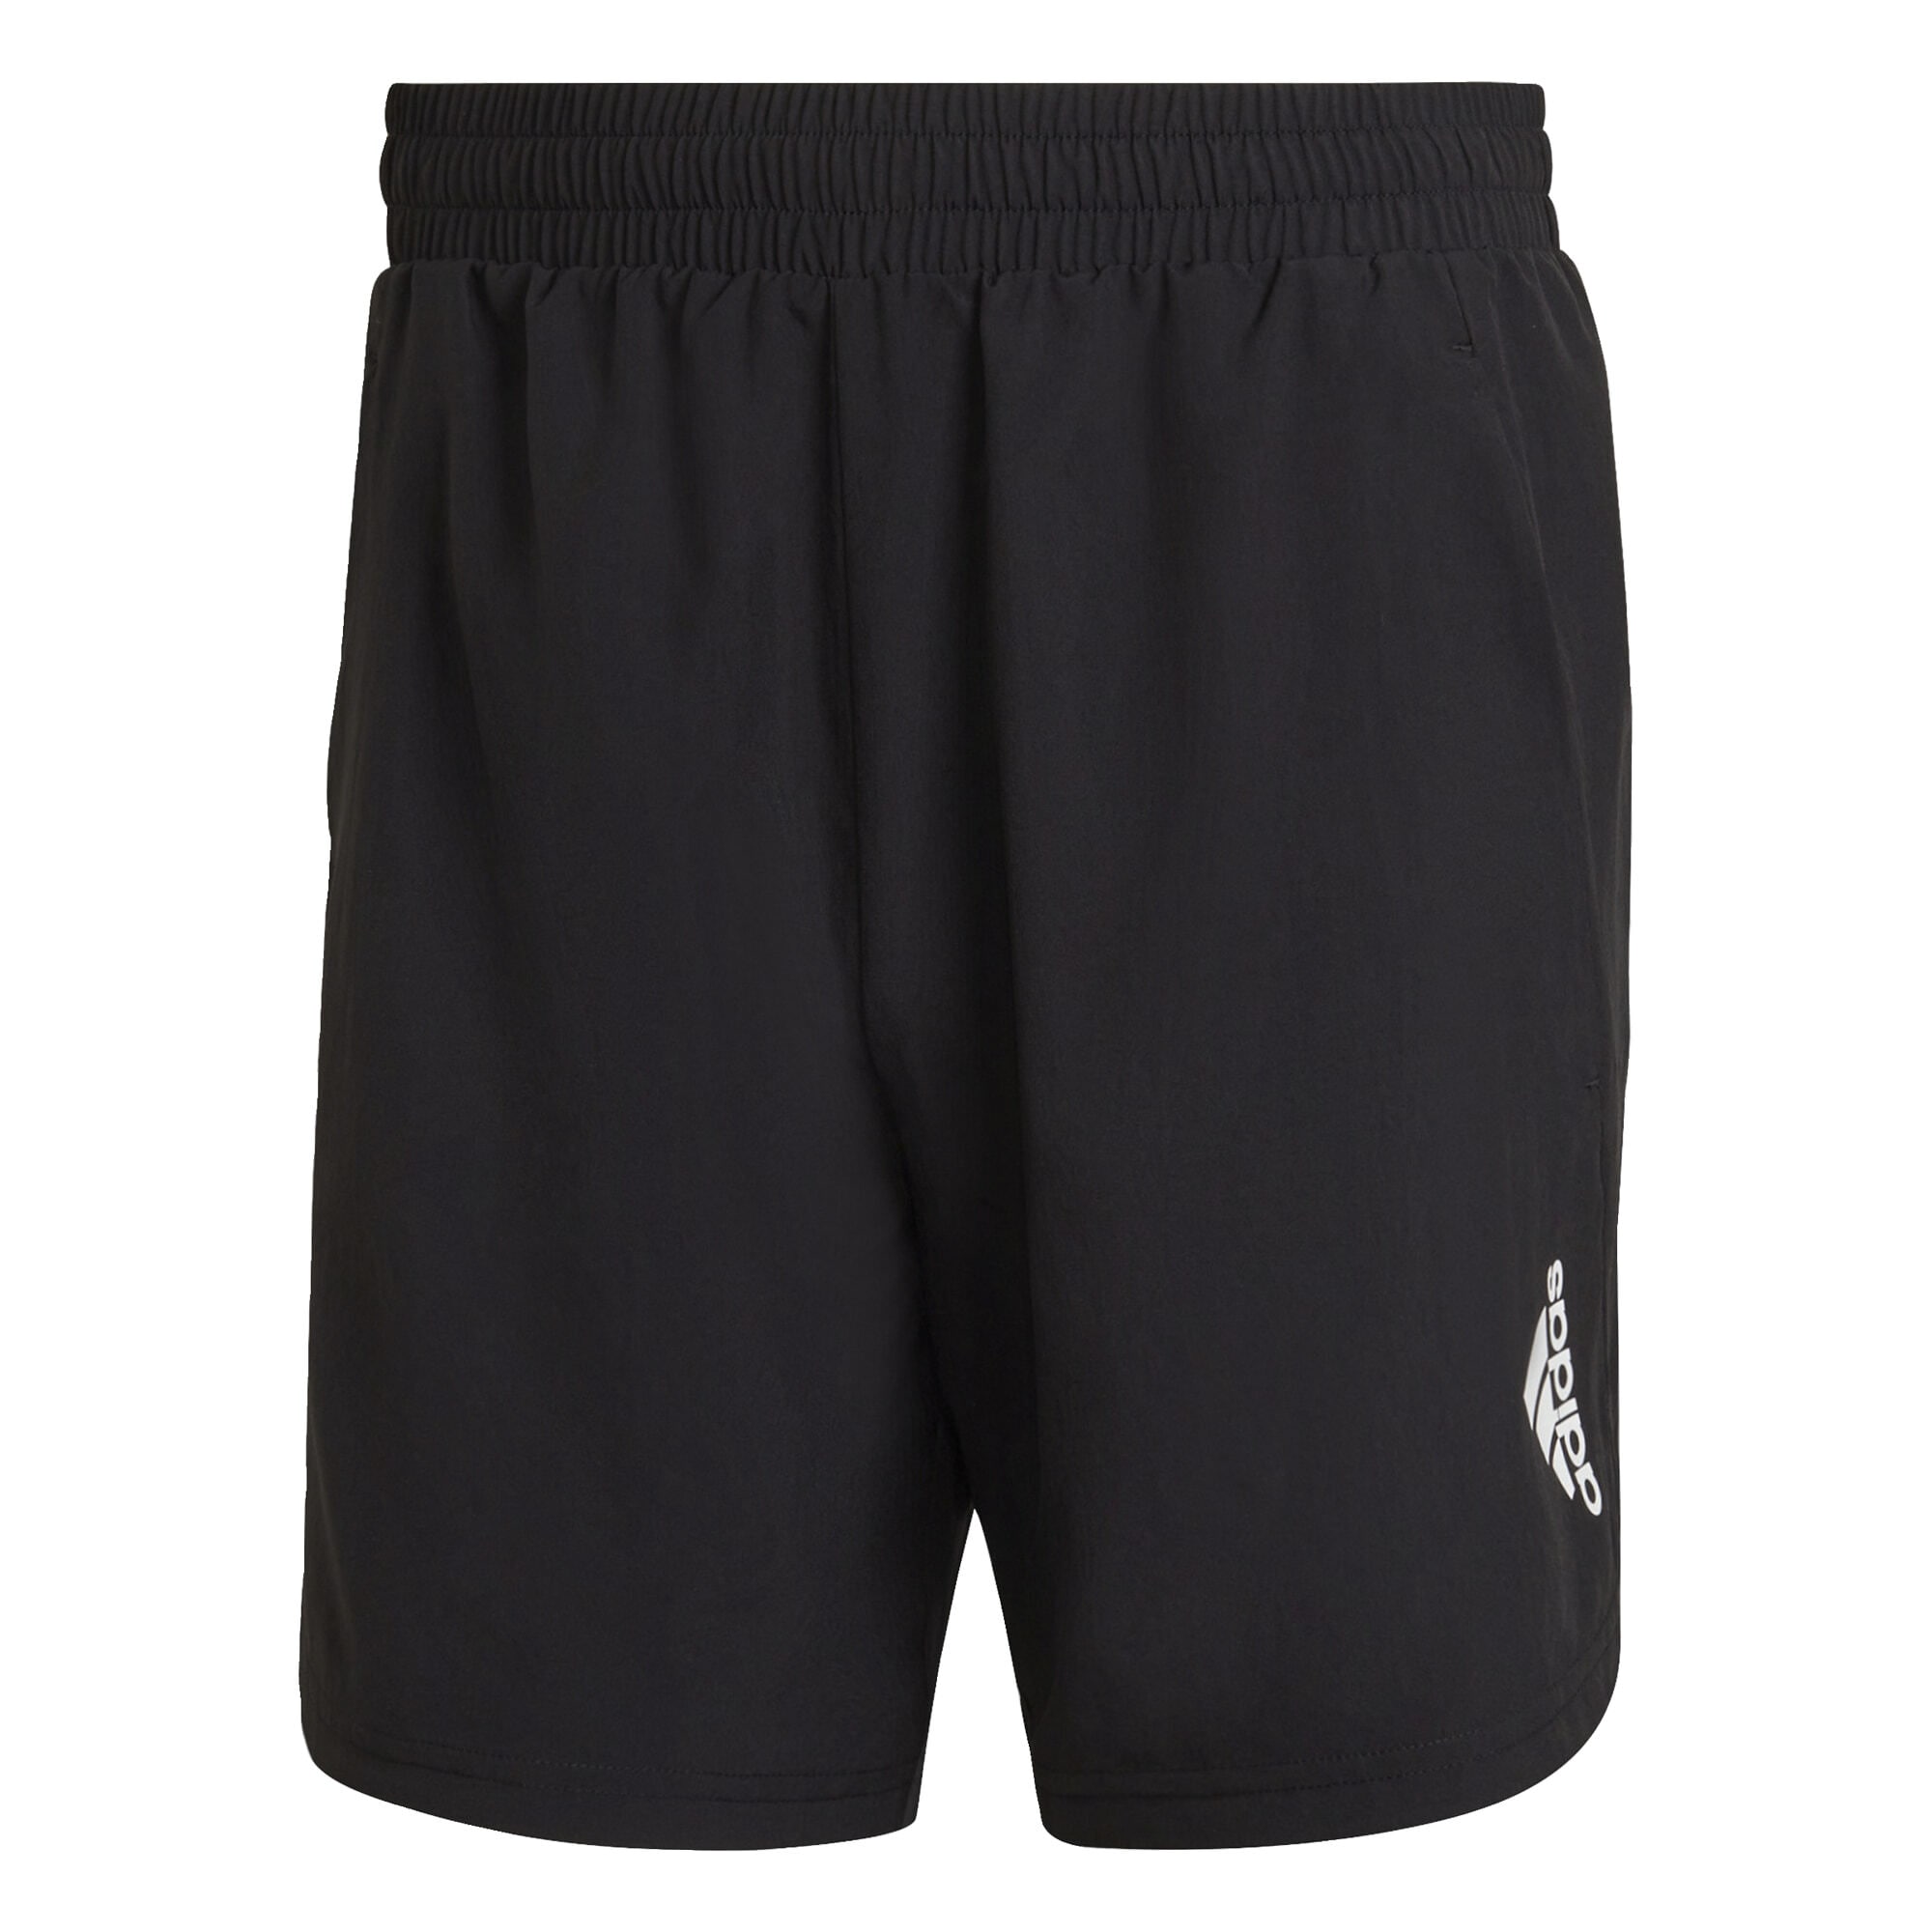 adidas Designed for Movement Shorts | Pro:Direct Tennis